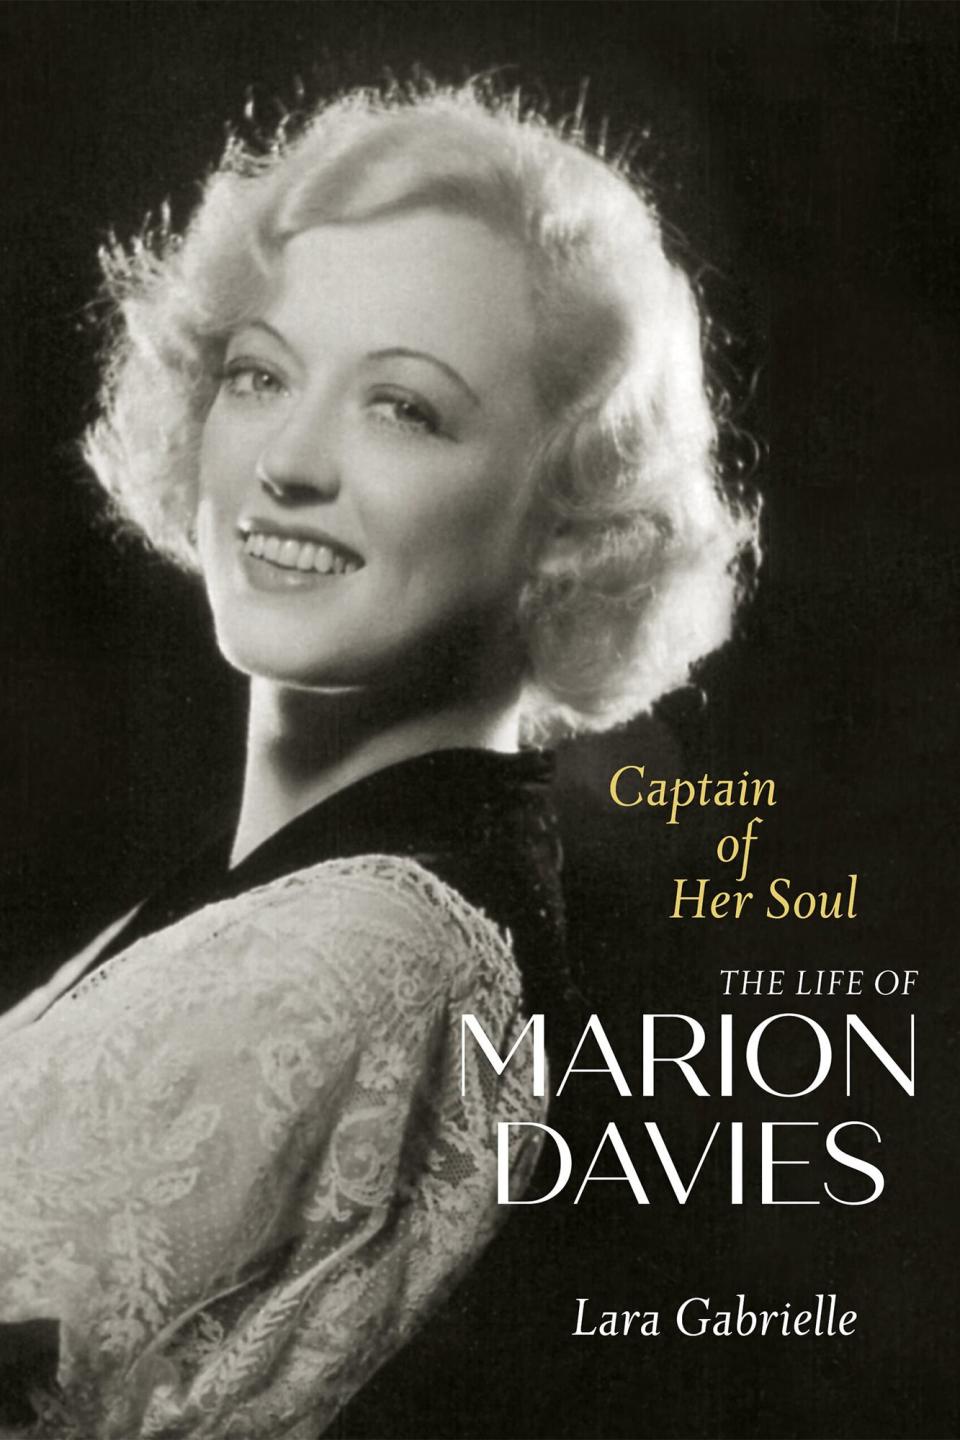 Captain of her Soul: The Life of Marion Davies by Lara Gabrielle